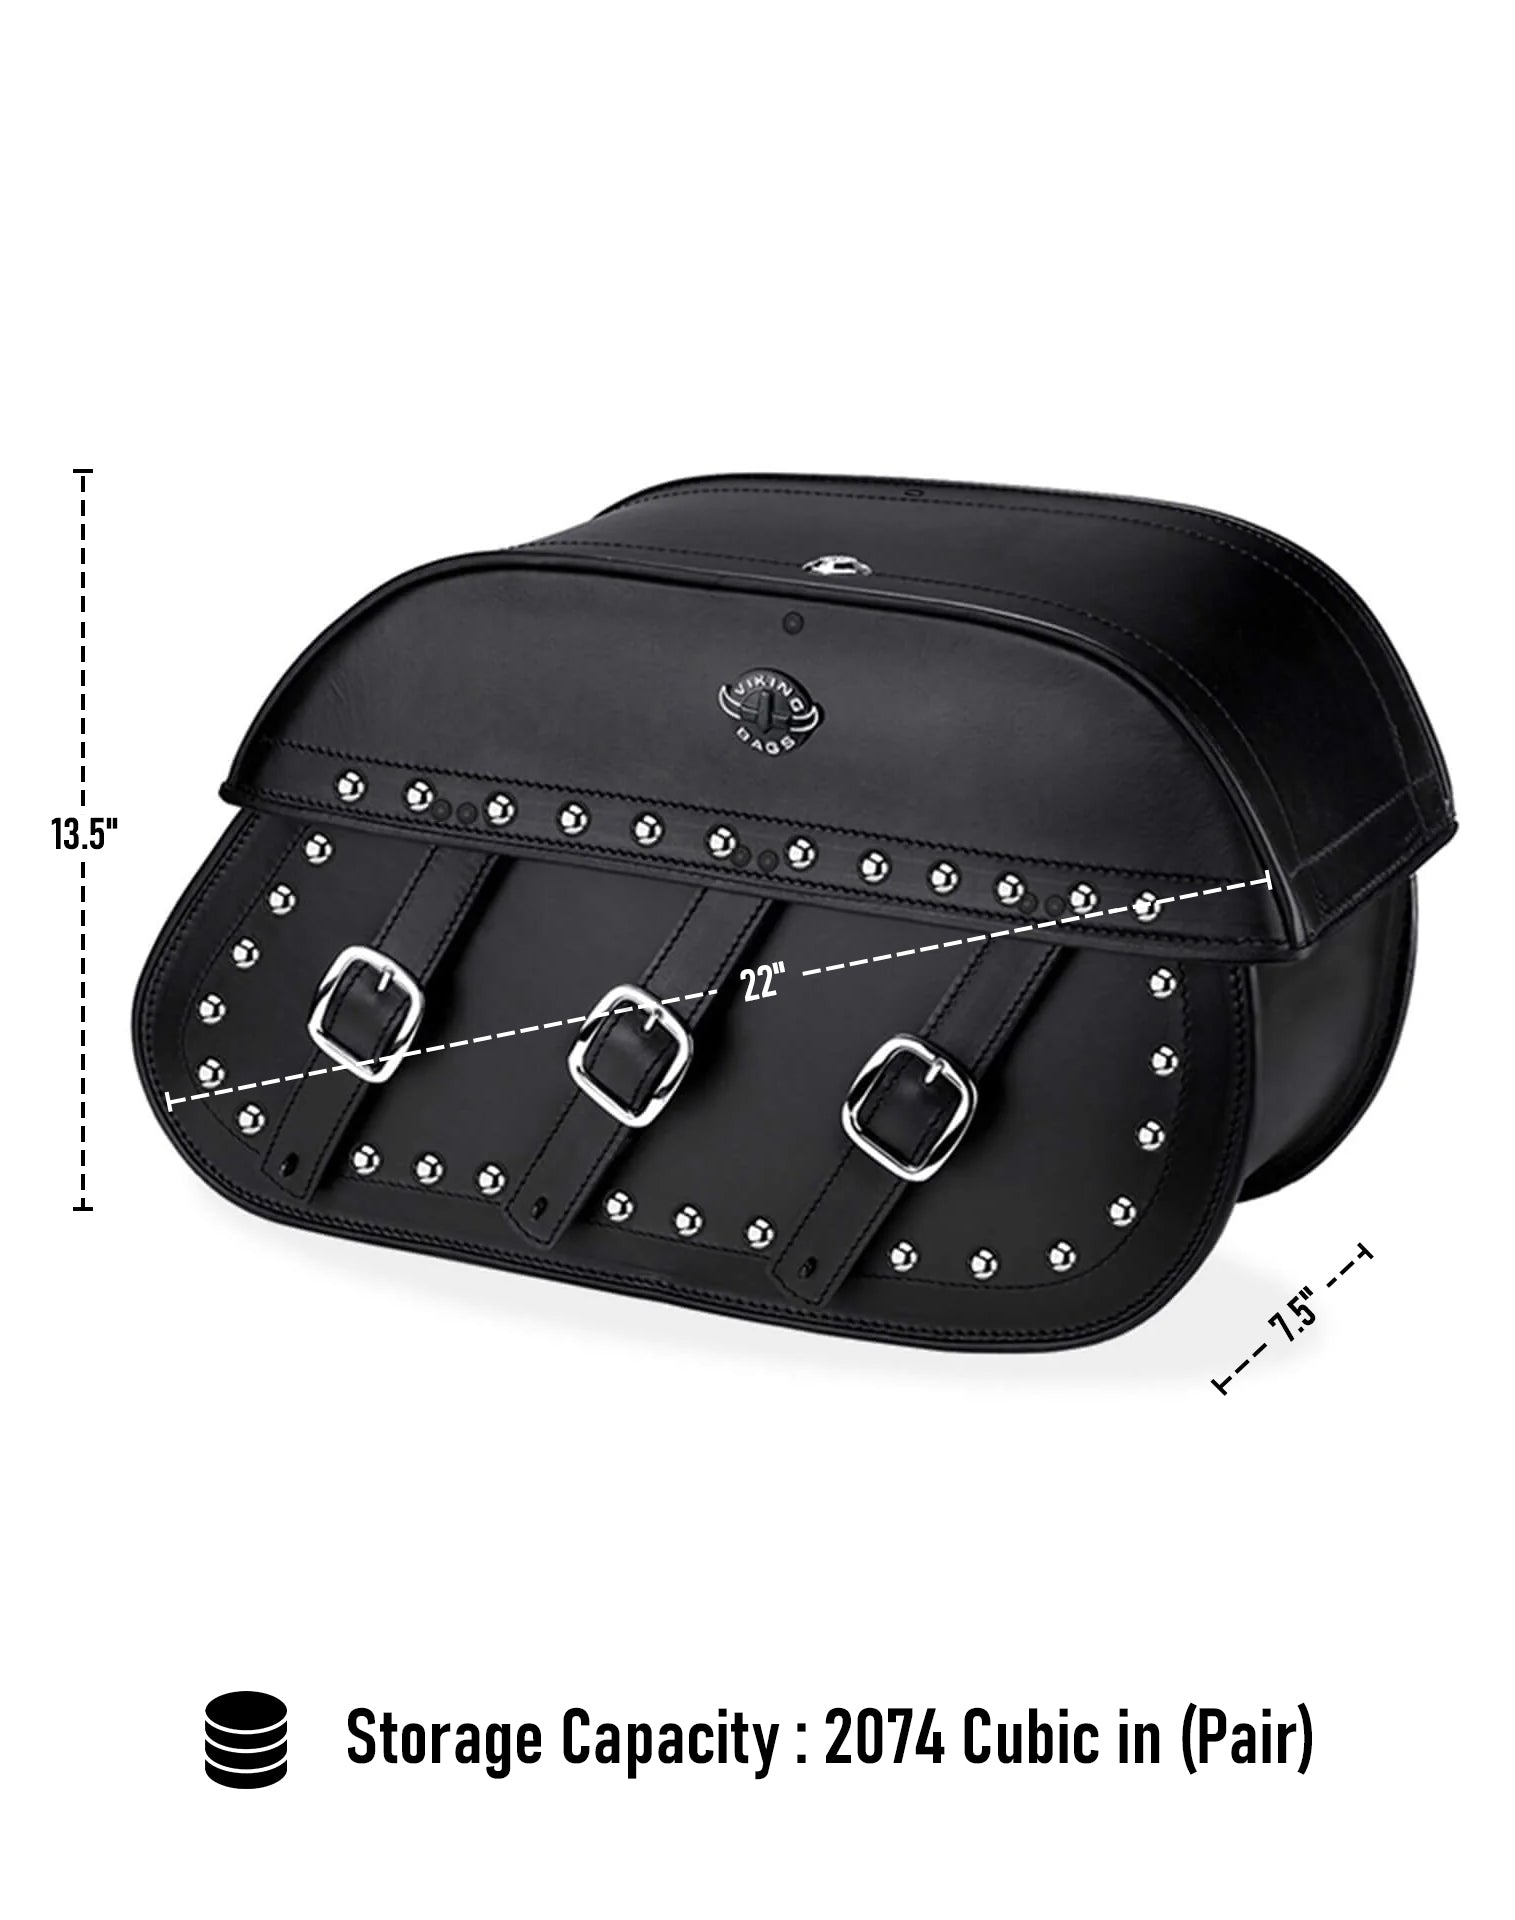 Viking Trianon Extra Large Indian Springfield Studded Leather Motorcycle Saddlebags Can Store Your Ridings Gears